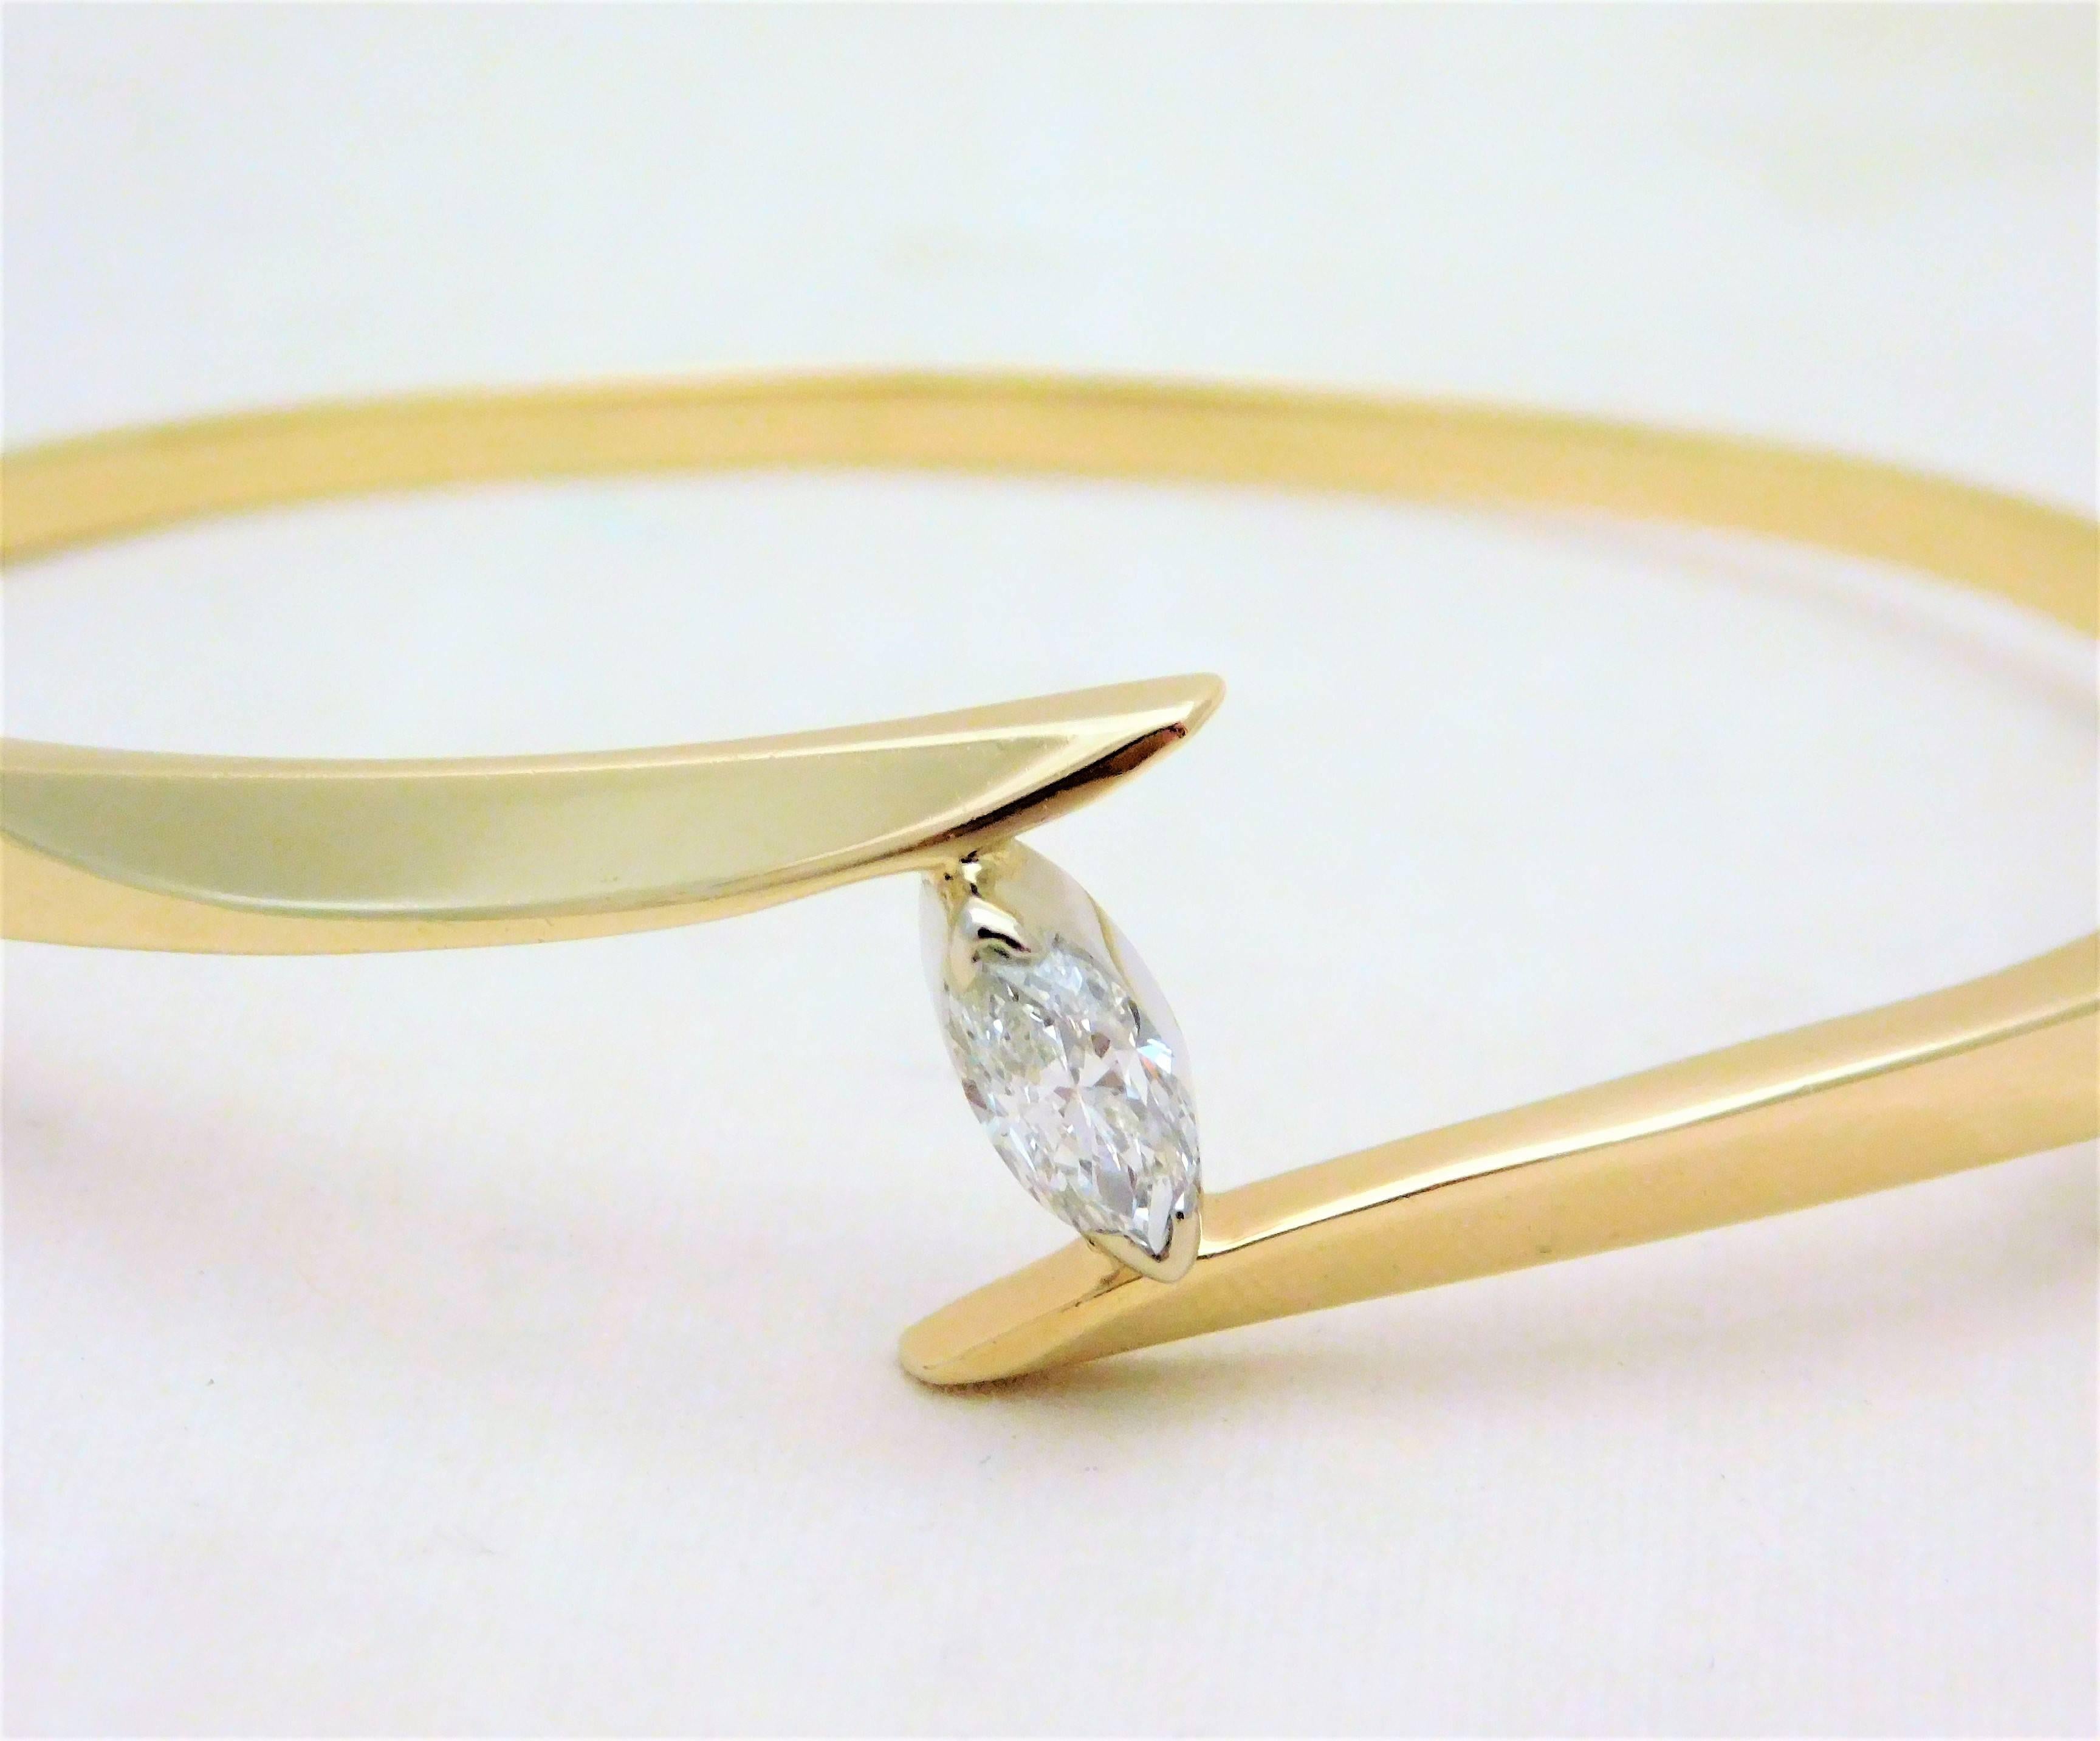 Vintage 14 Karat Marquise Diamond Bangle Bracelet In Excellent Condition For Sale In Metairie, LA